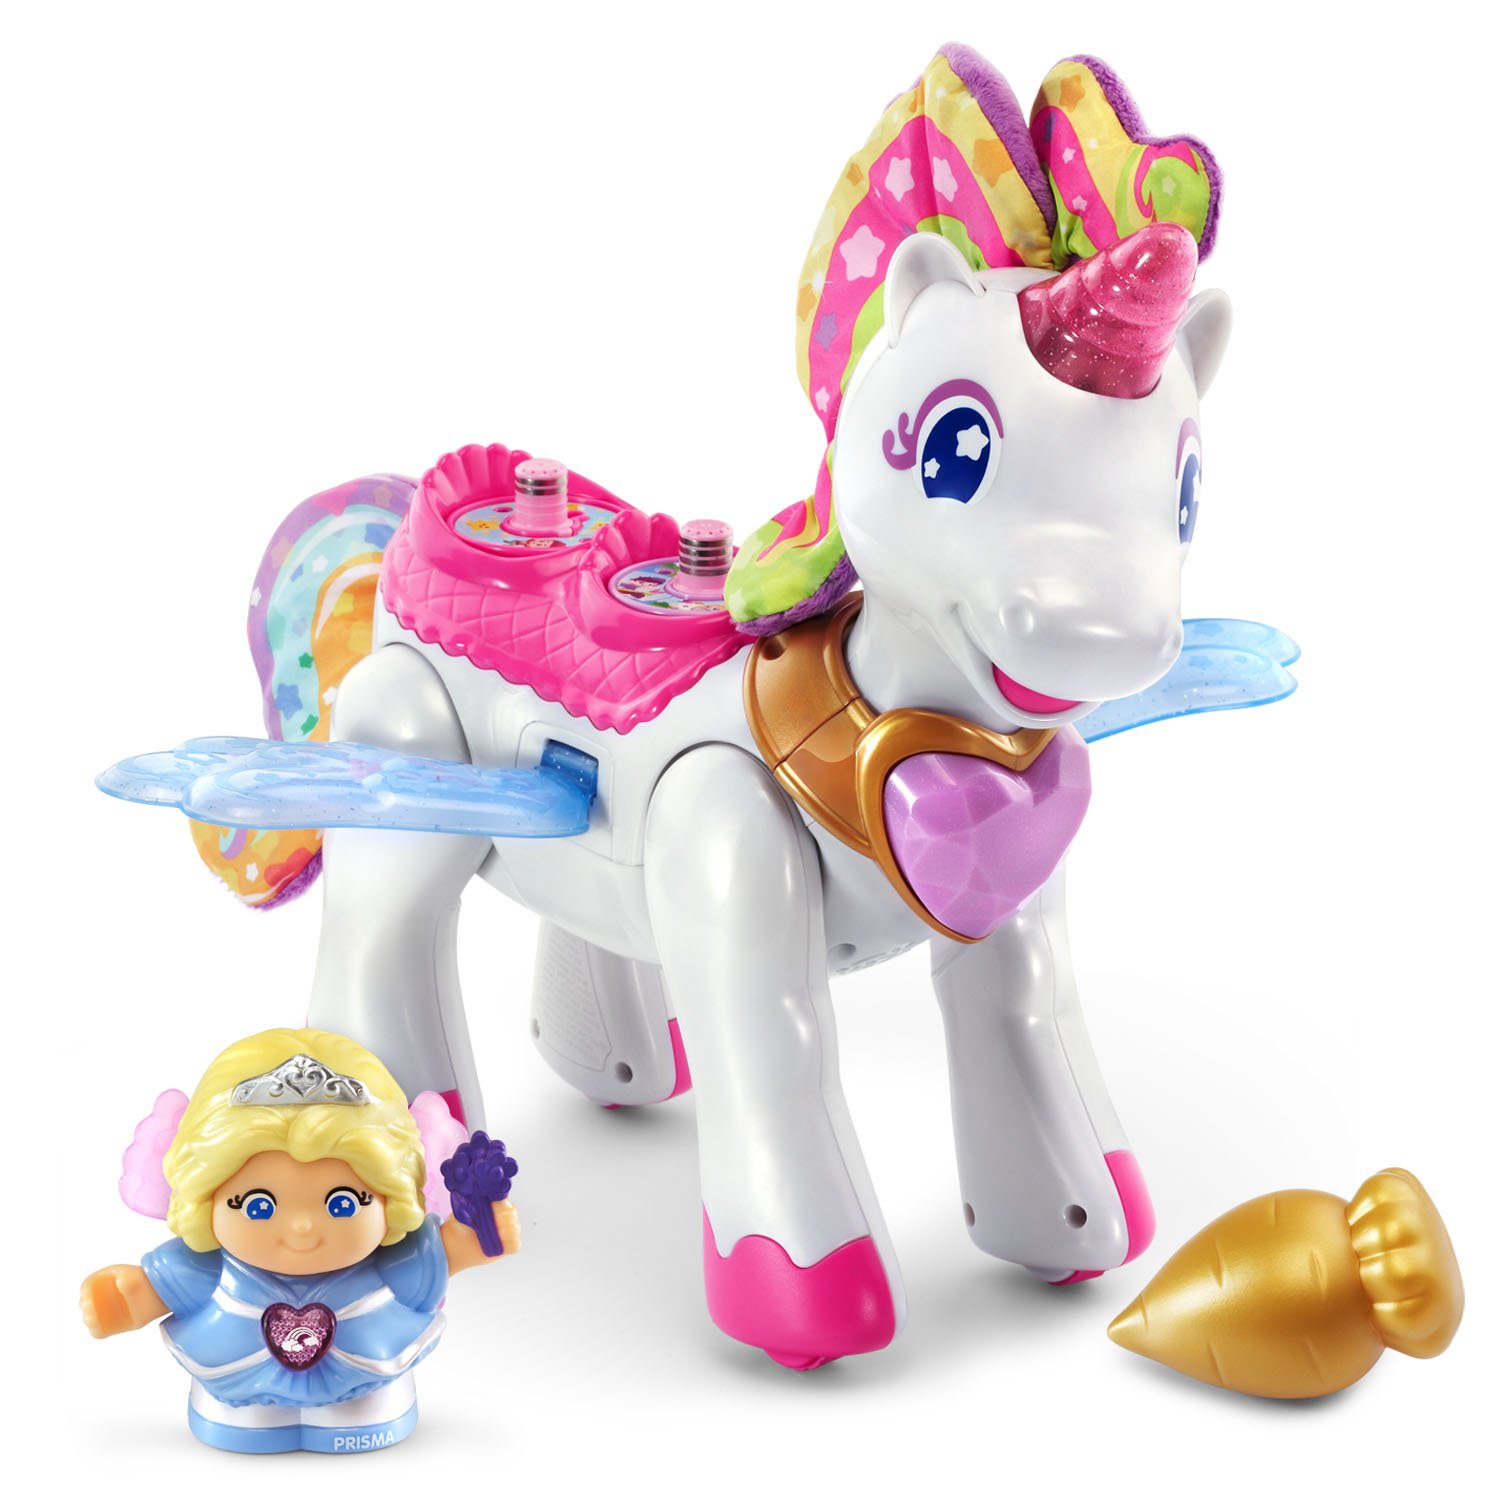 23 Best Unicorn Toys and Gifts for Girls 2022 - Review & Buying Guide 17